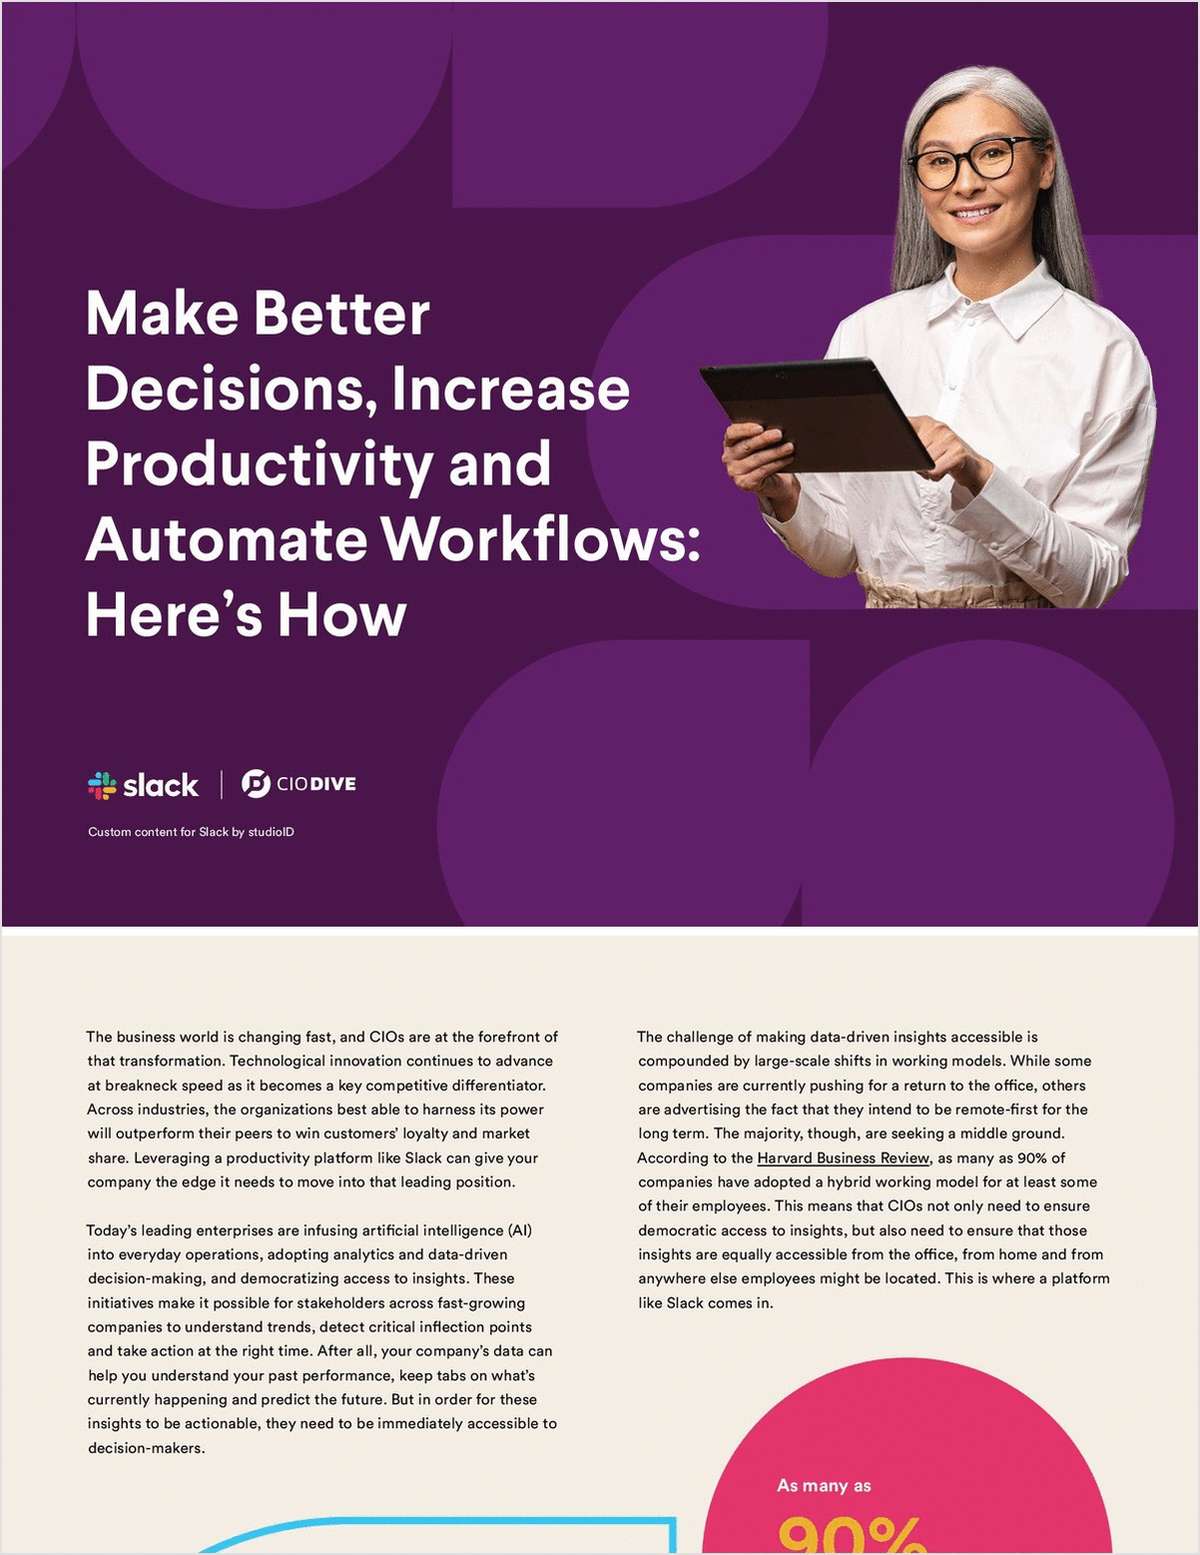 CIOs: How to Increase Productivity and Automate Workflows